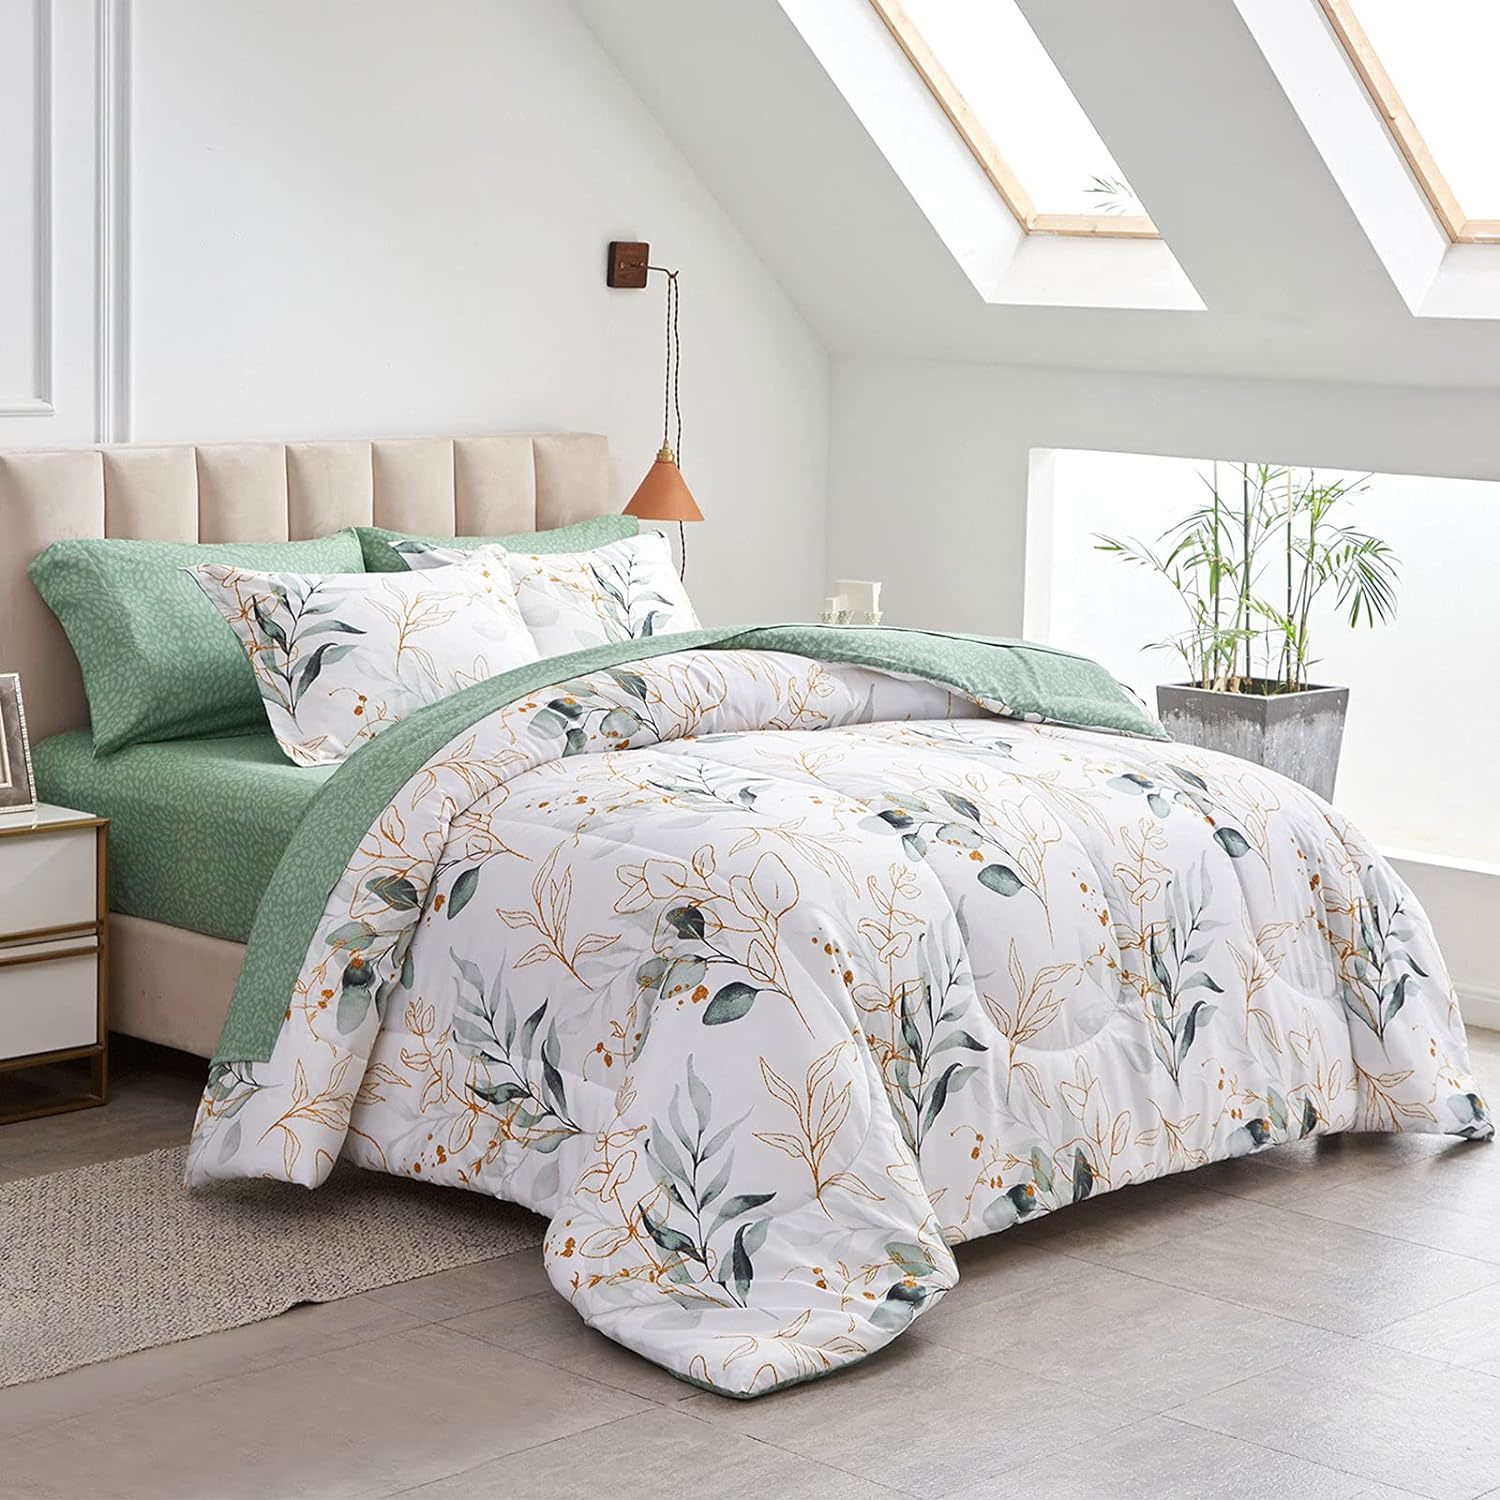 7 Piece Bed In A Bag Queen, Green Leaves Printed On White Botanical Design, Micr - $87.99